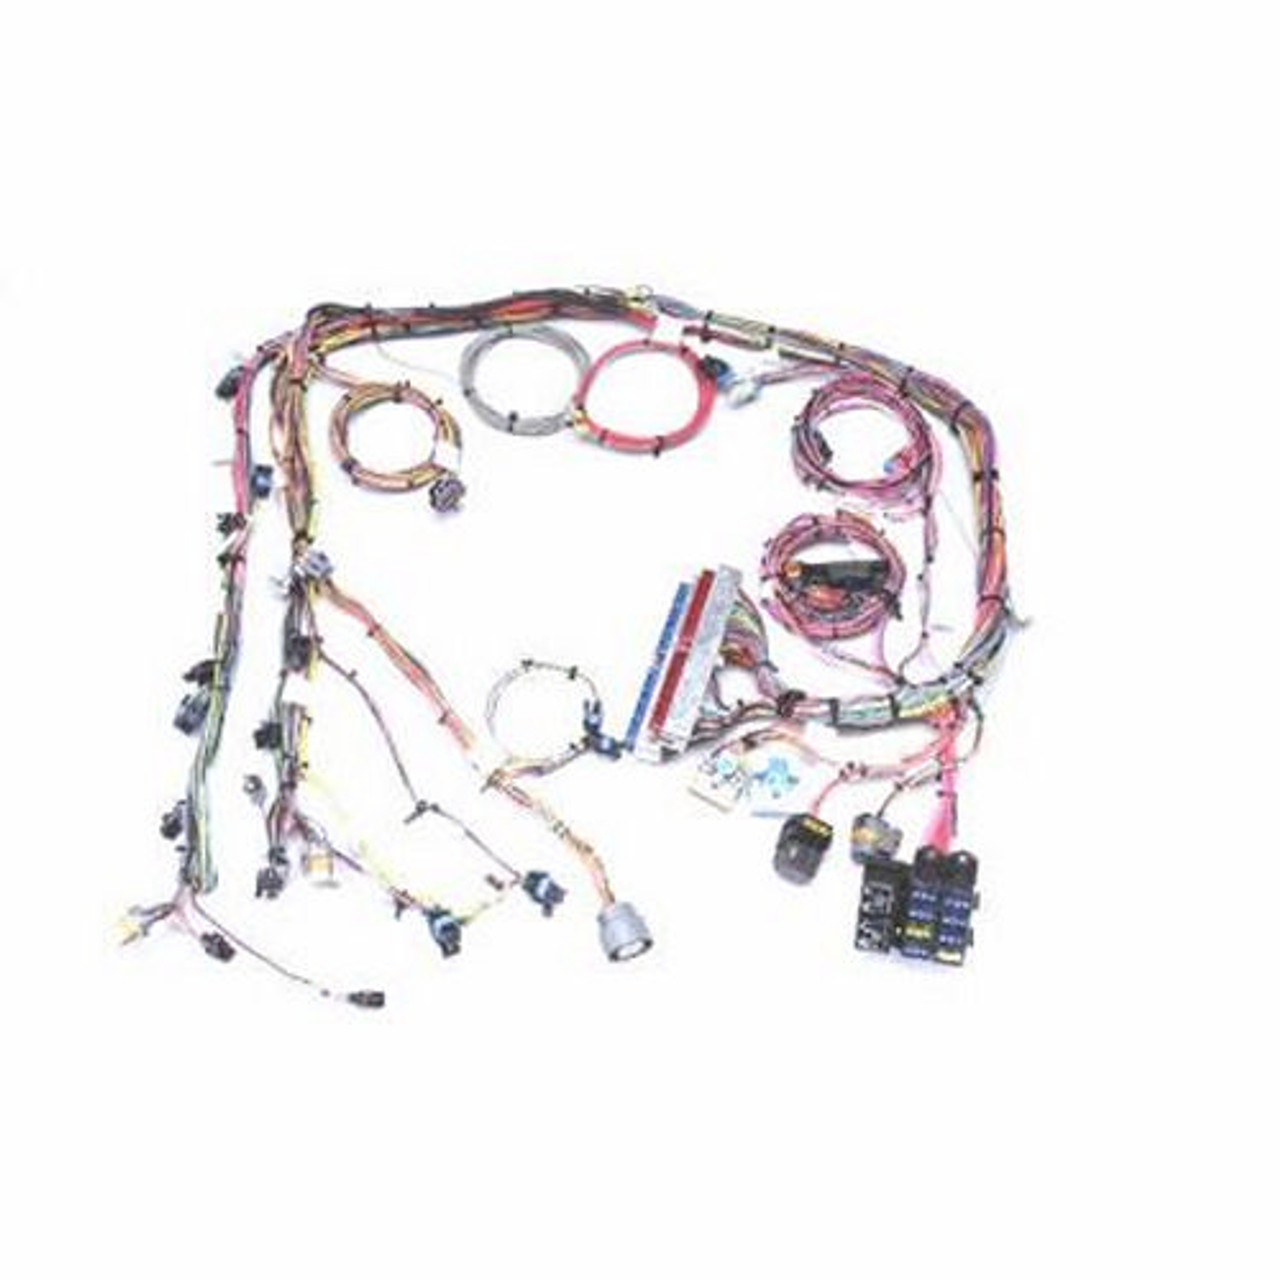 Painless 99-   Vortec Engine FI Wiring Harness - PWI60217